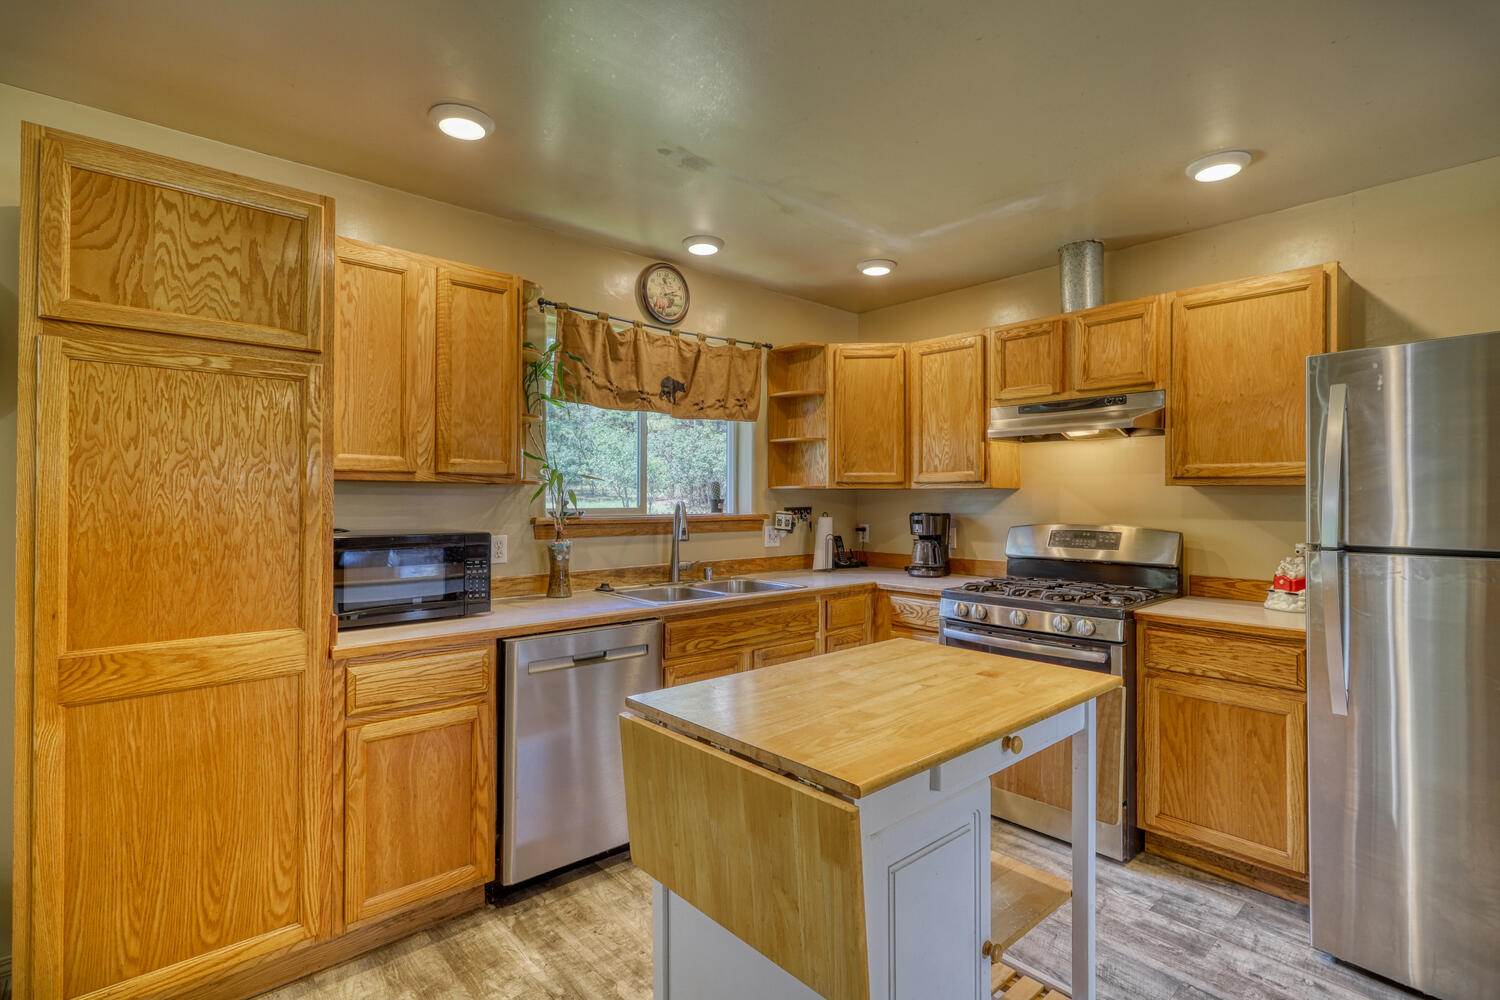 128 Enchanted Place, Pagosa Springs, CO 81147